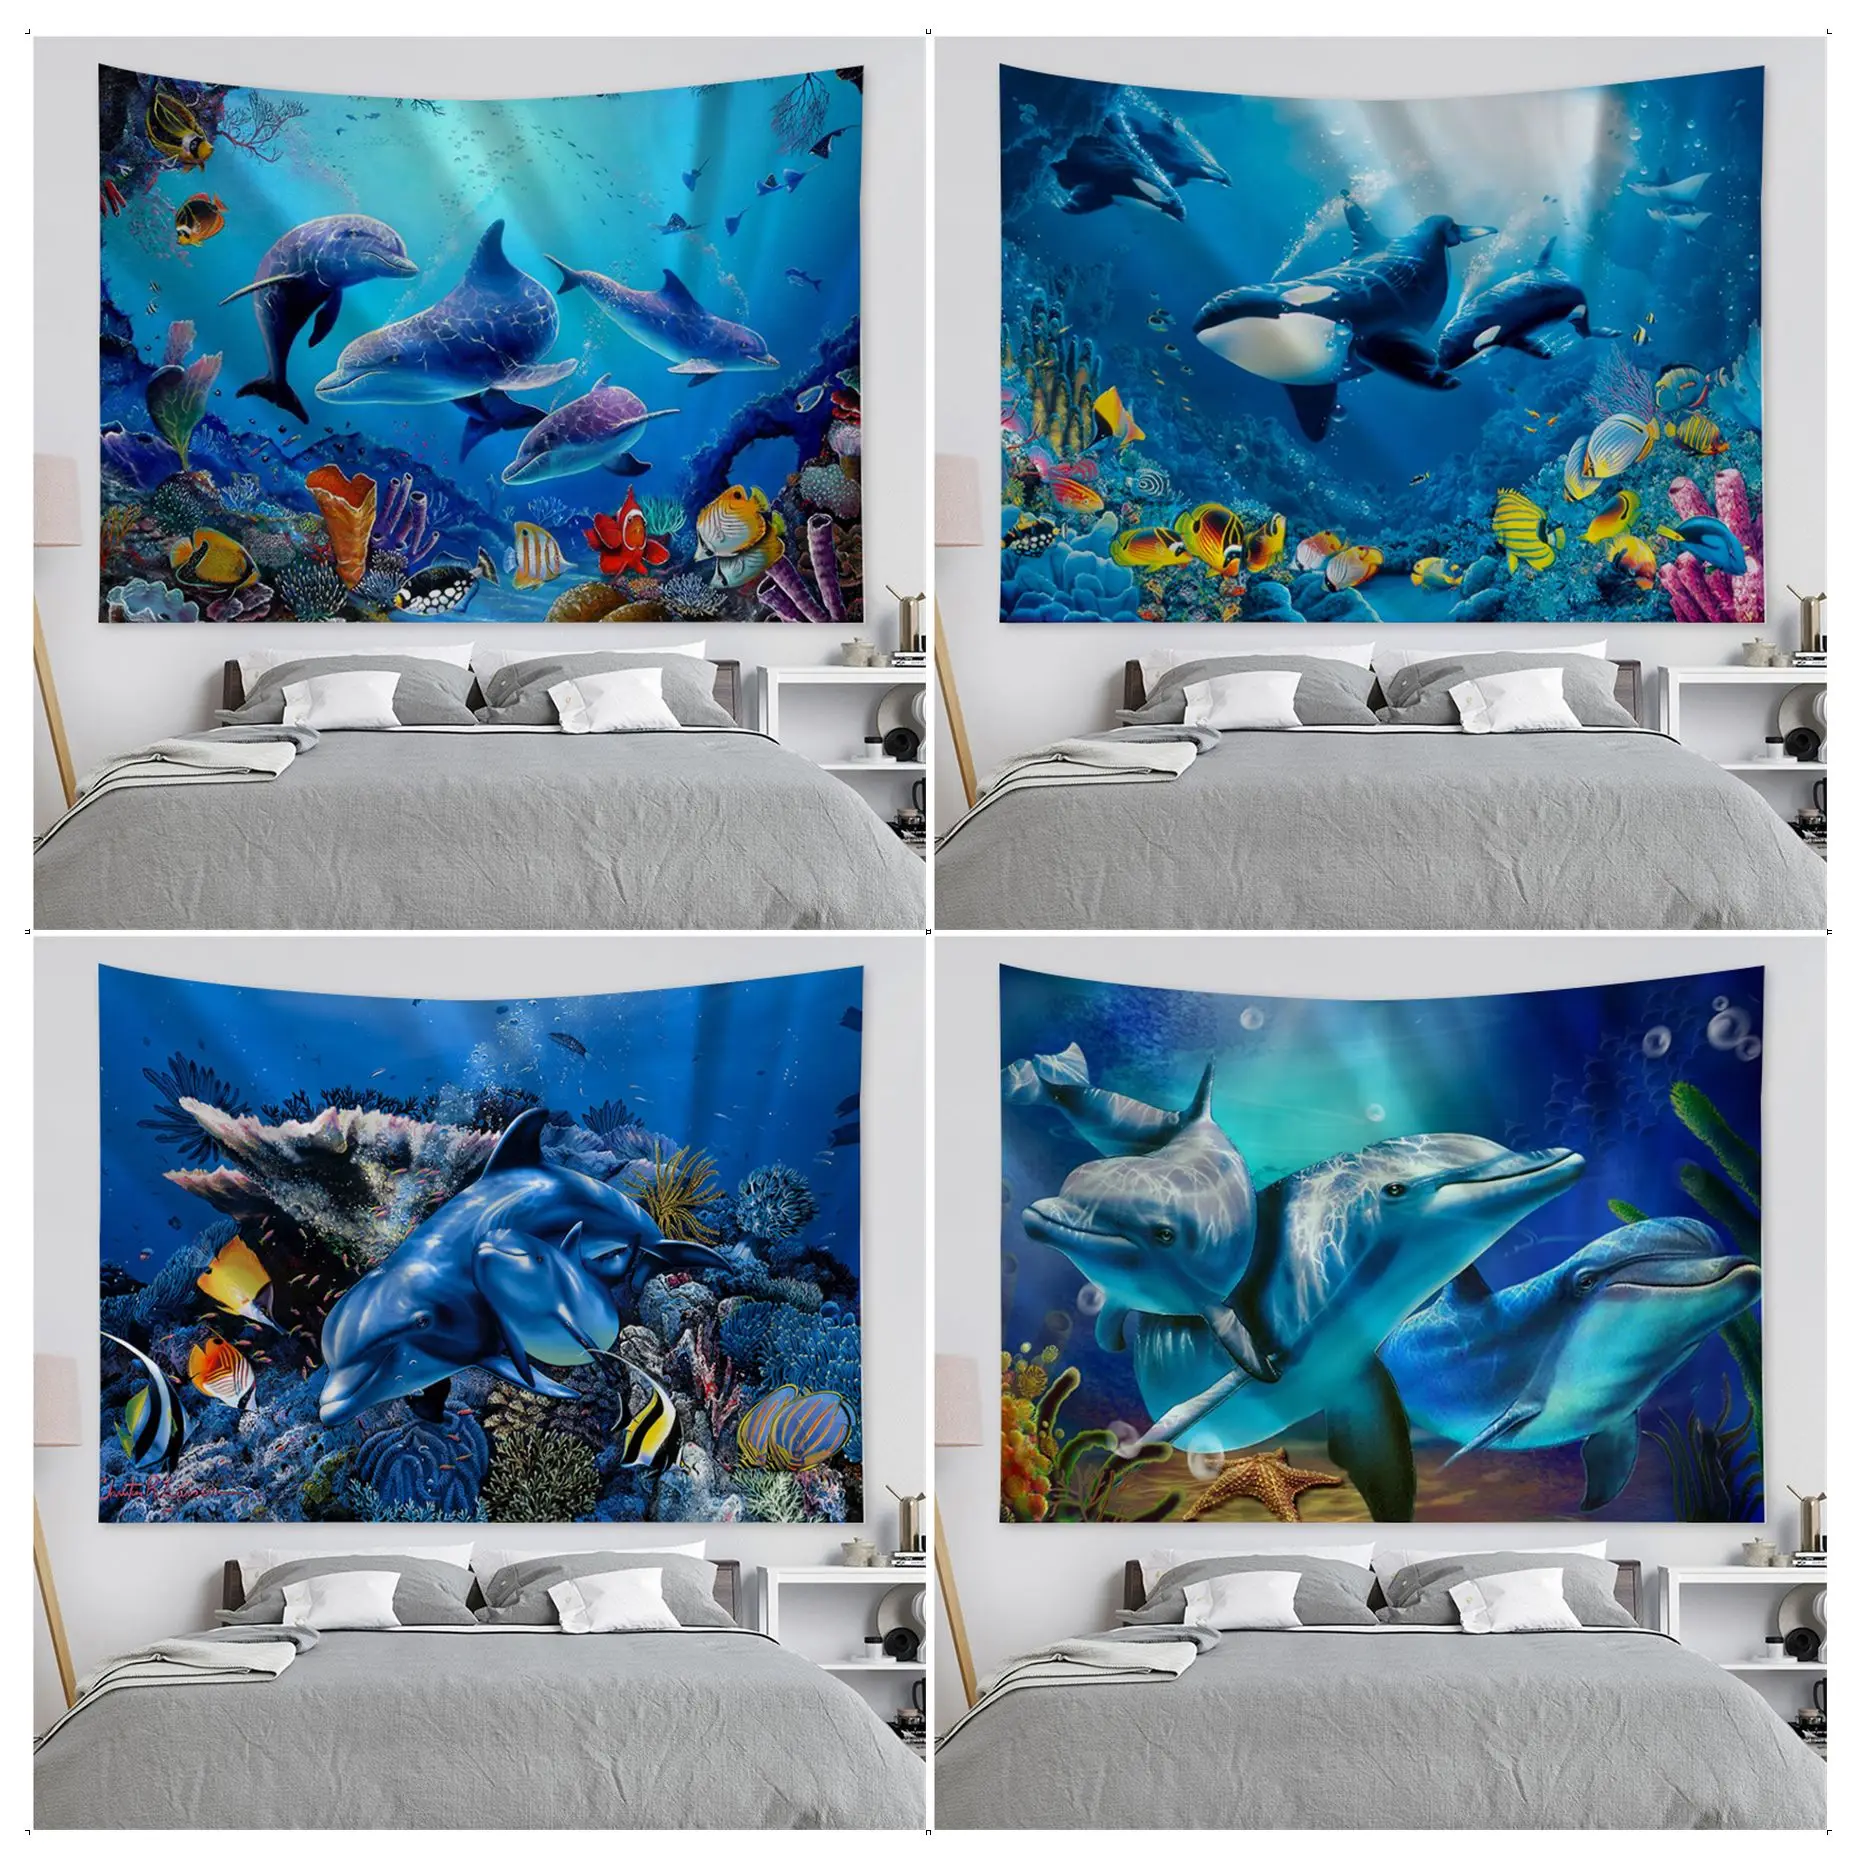 

Underwater World Tapestry Chart Tapestry Home Decoration hippie bohemian decoration divination Wall Hanging Home Decor